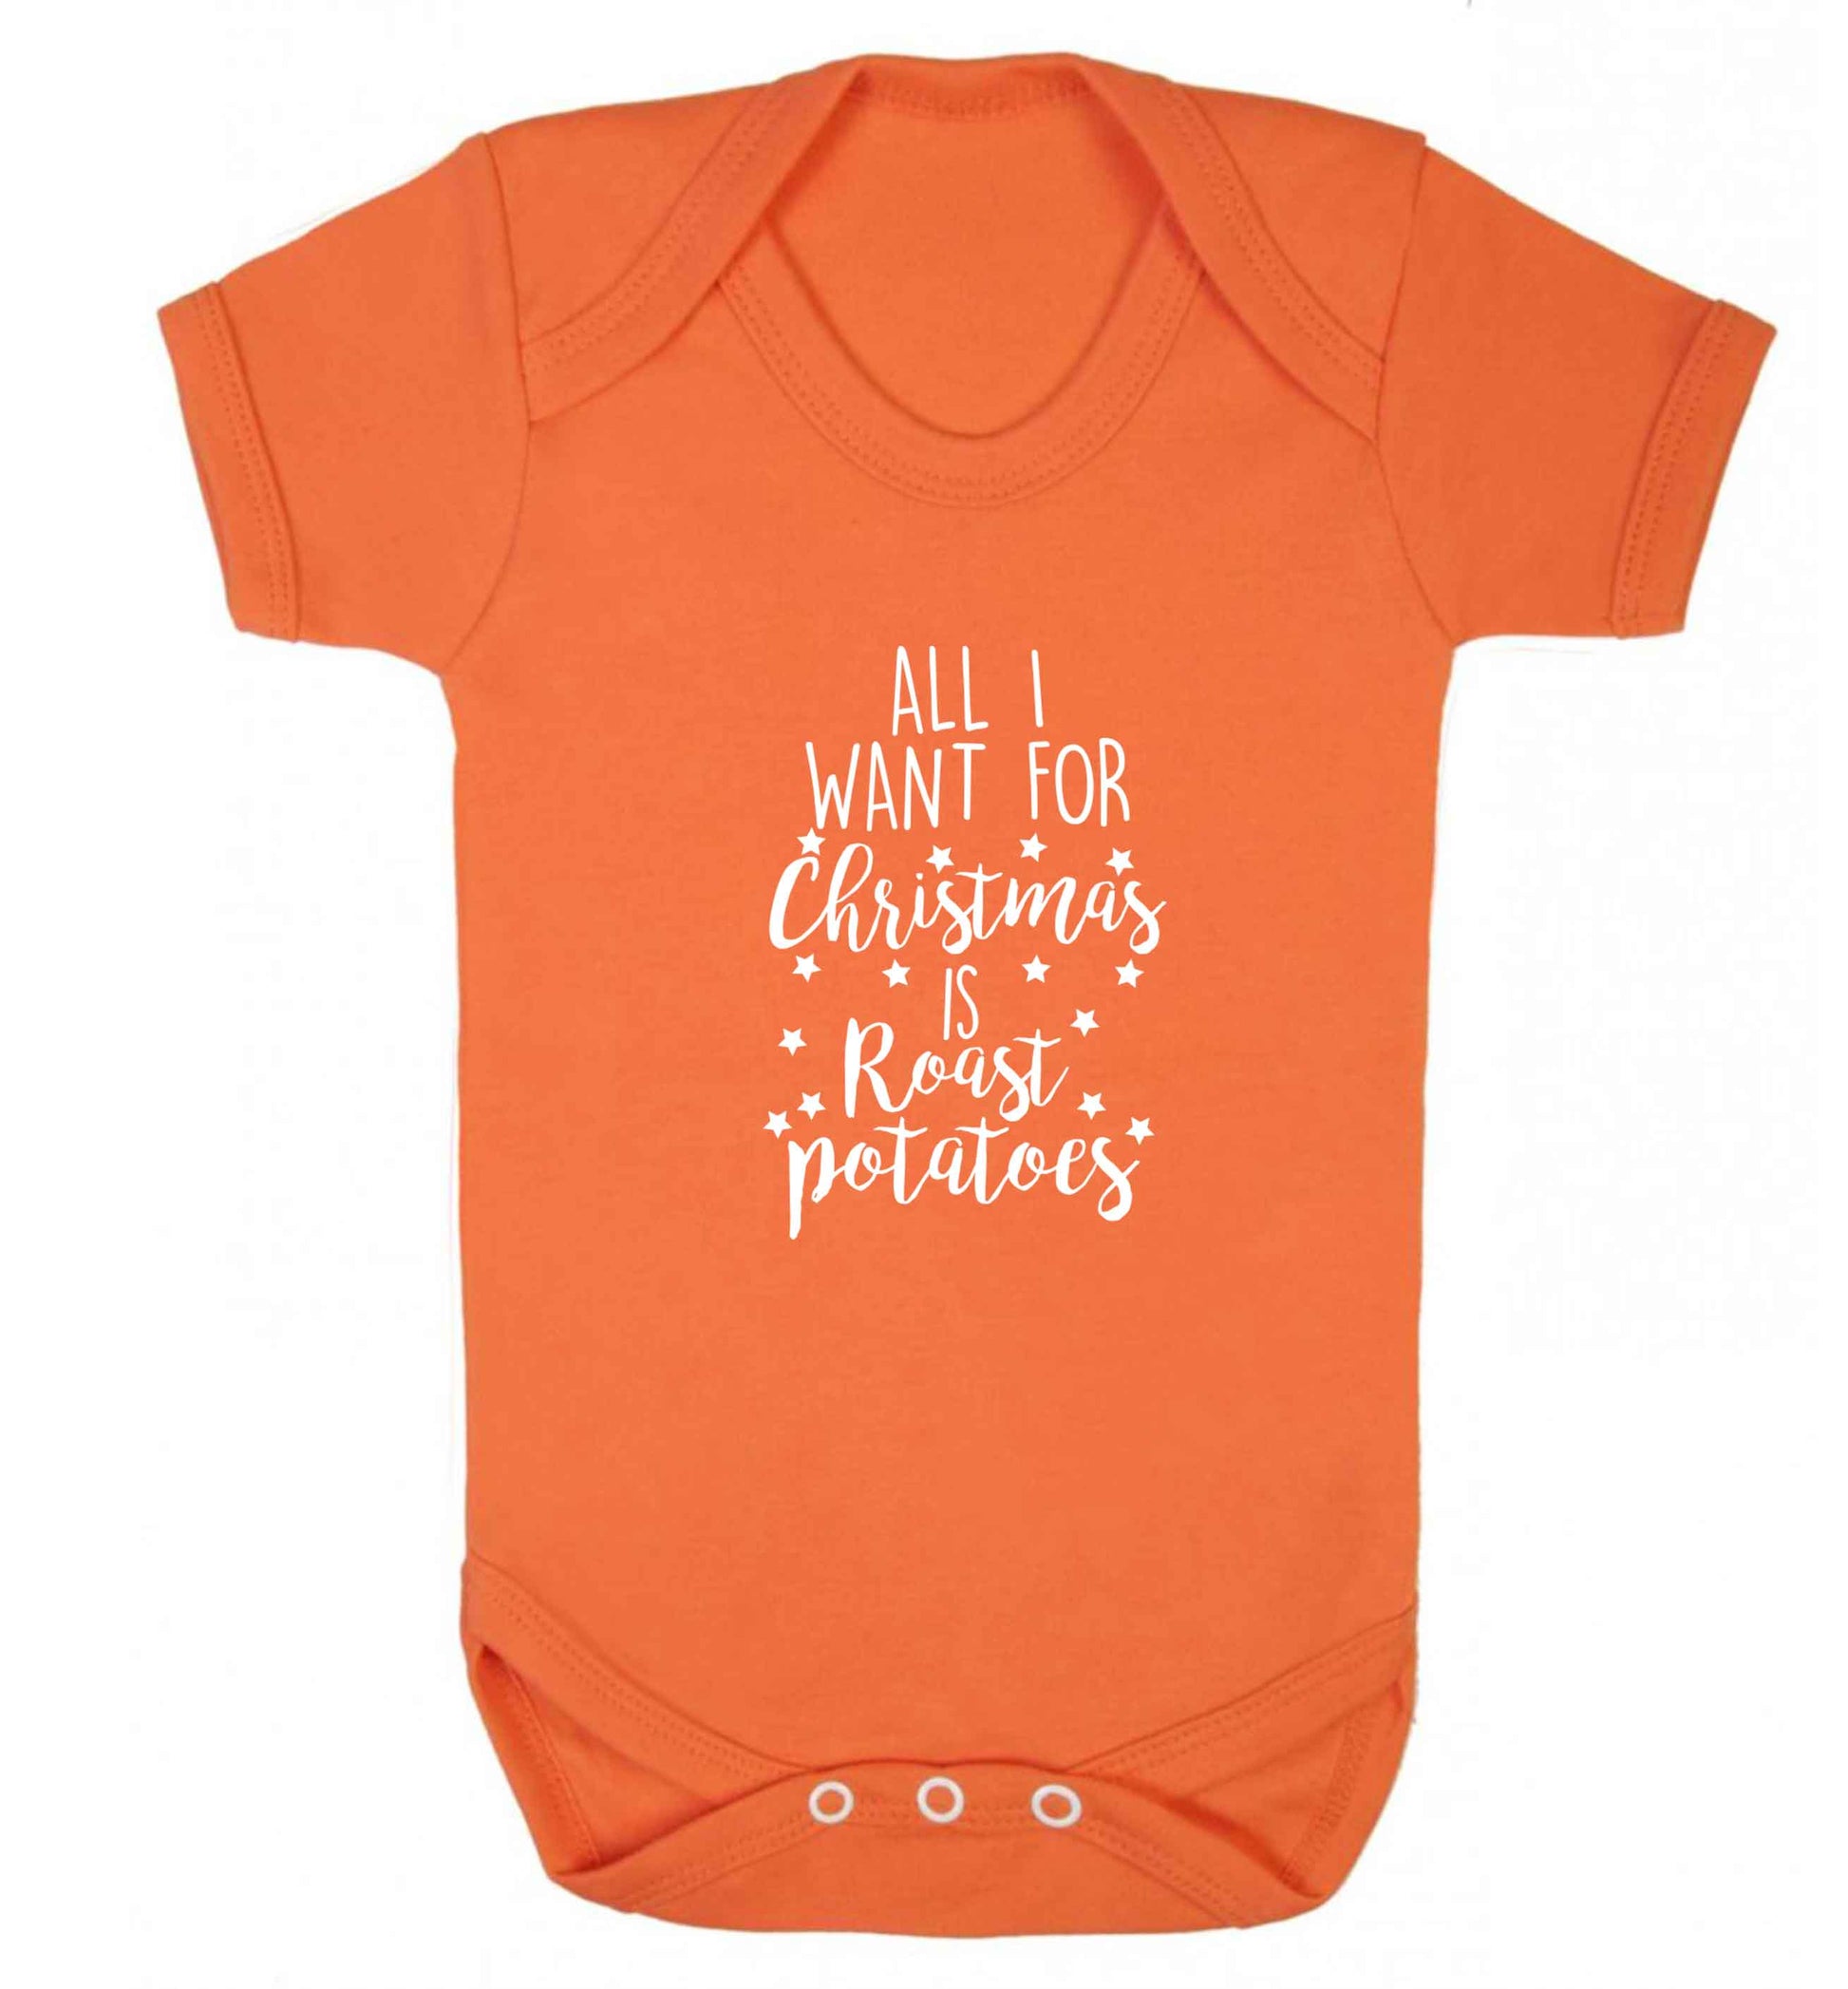 All I want for Christmas is roast potatoes baby vest orange 18-24 months